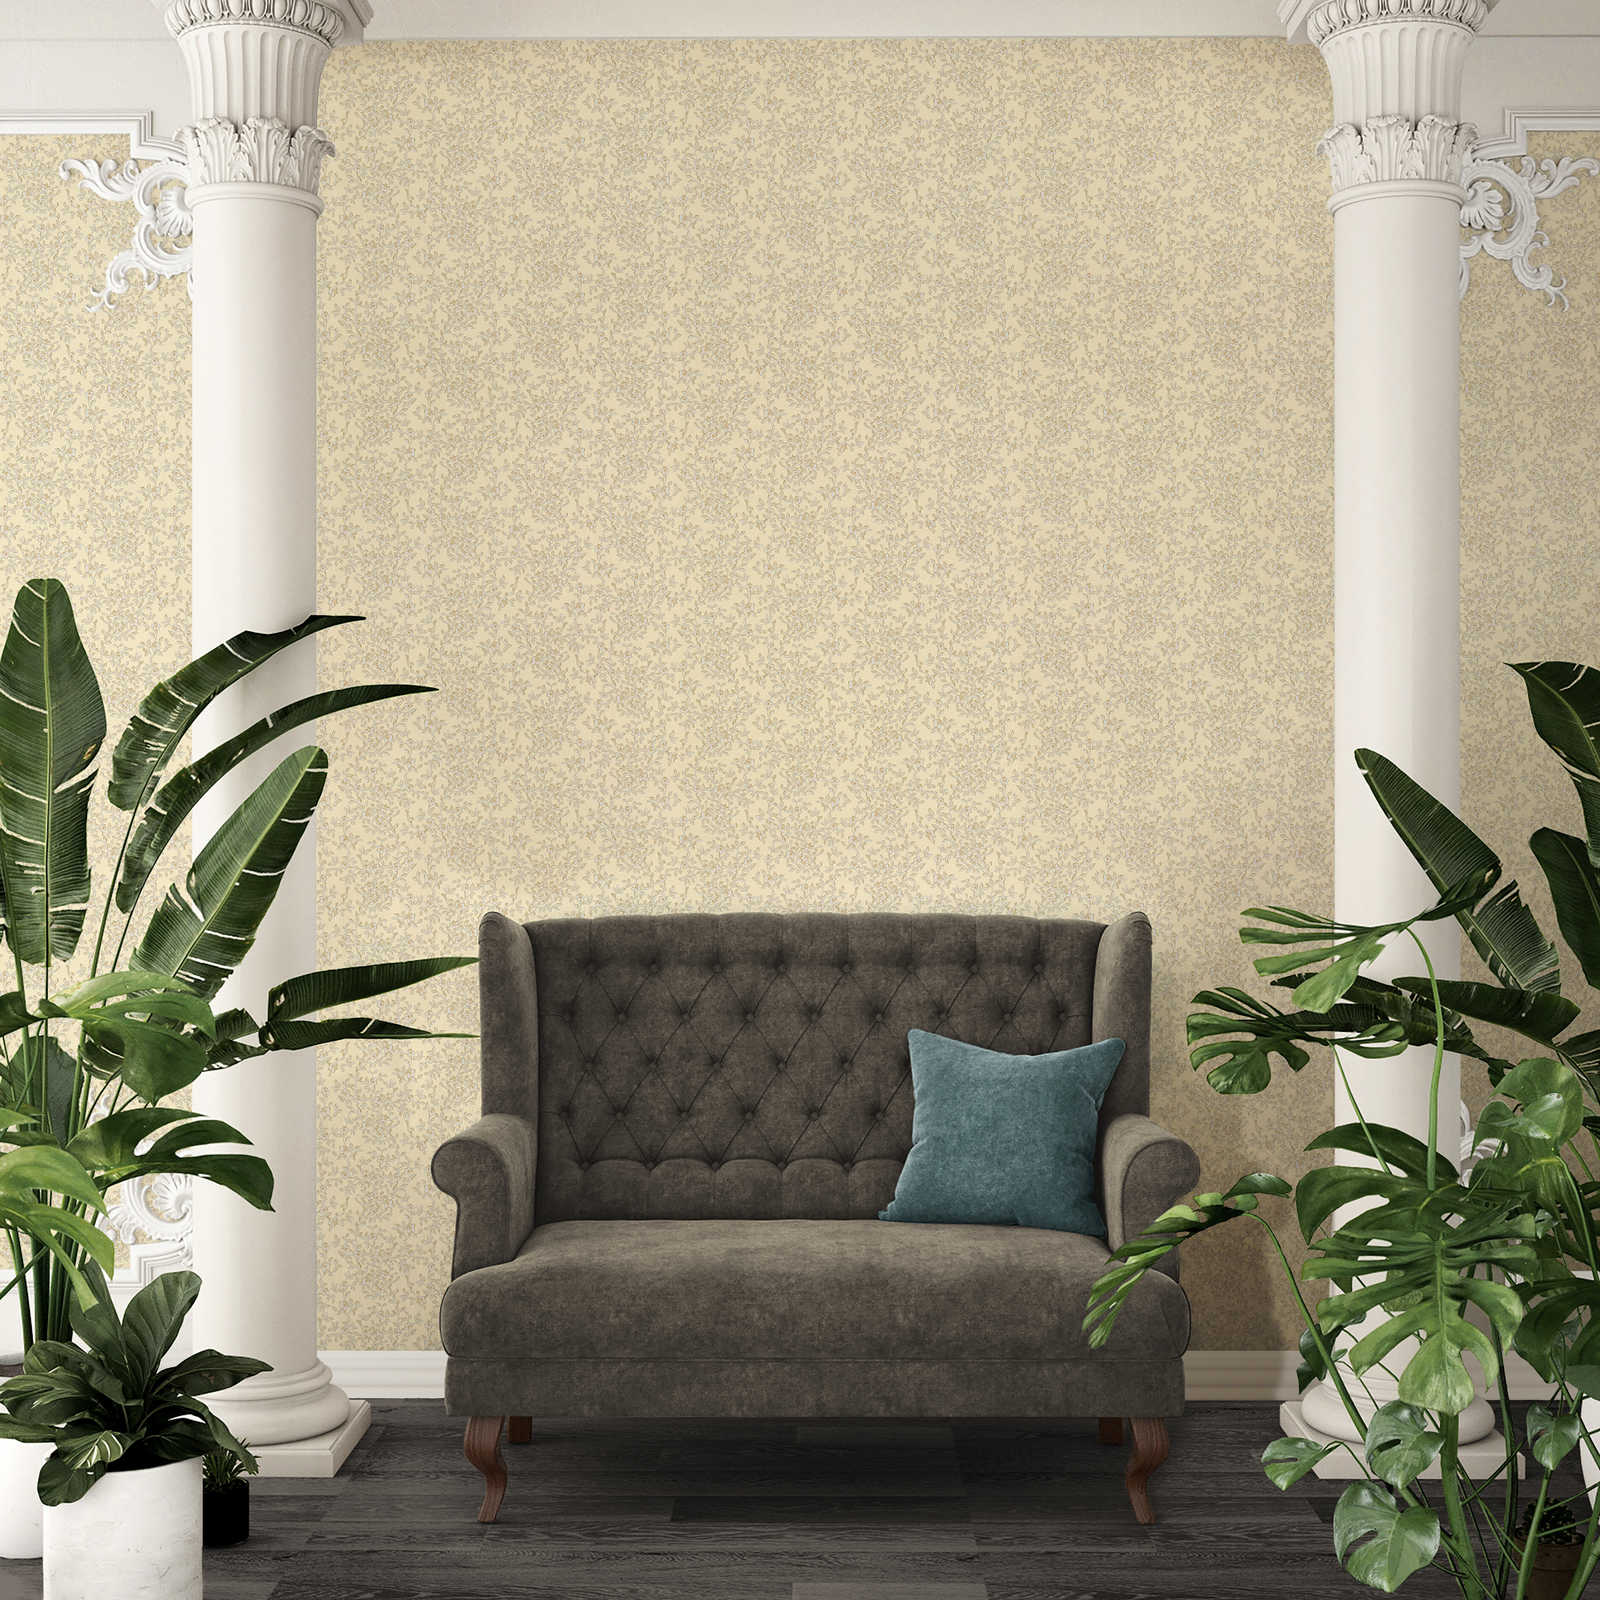             VERSACE gold wallpaper with floral pattern - metallic
        